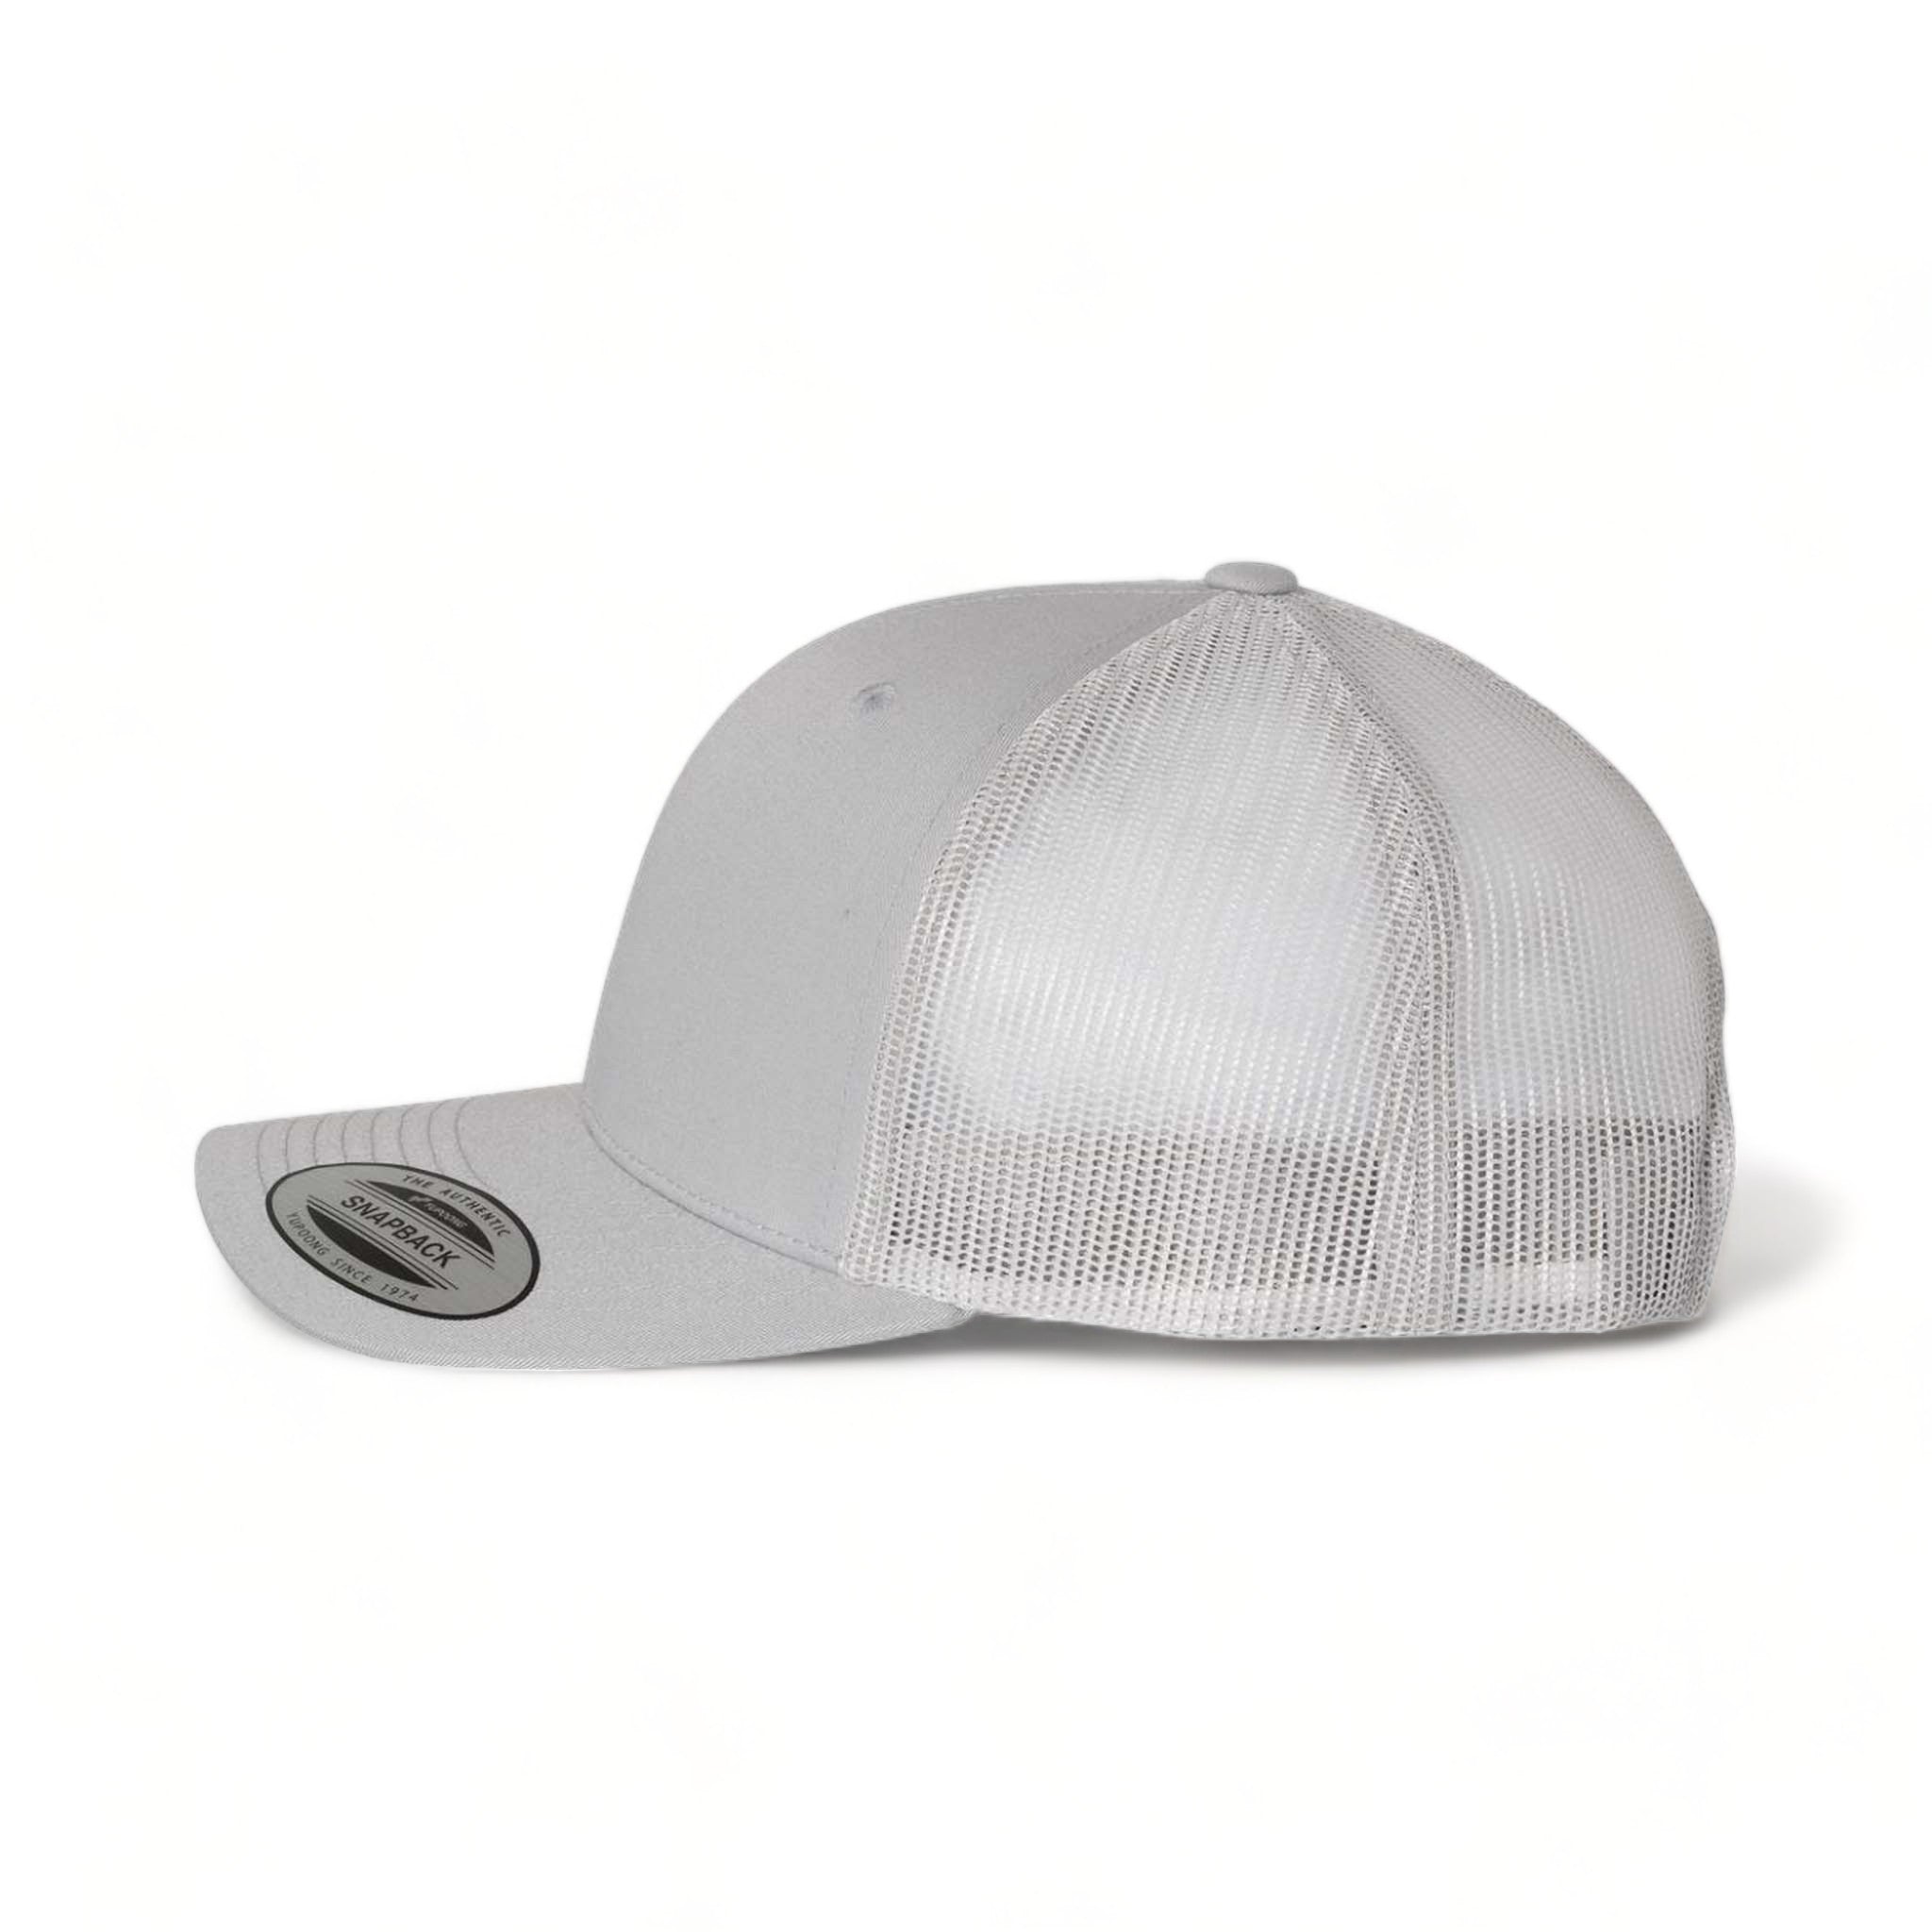 Side view of YP Classics 6606 custom hat in silver